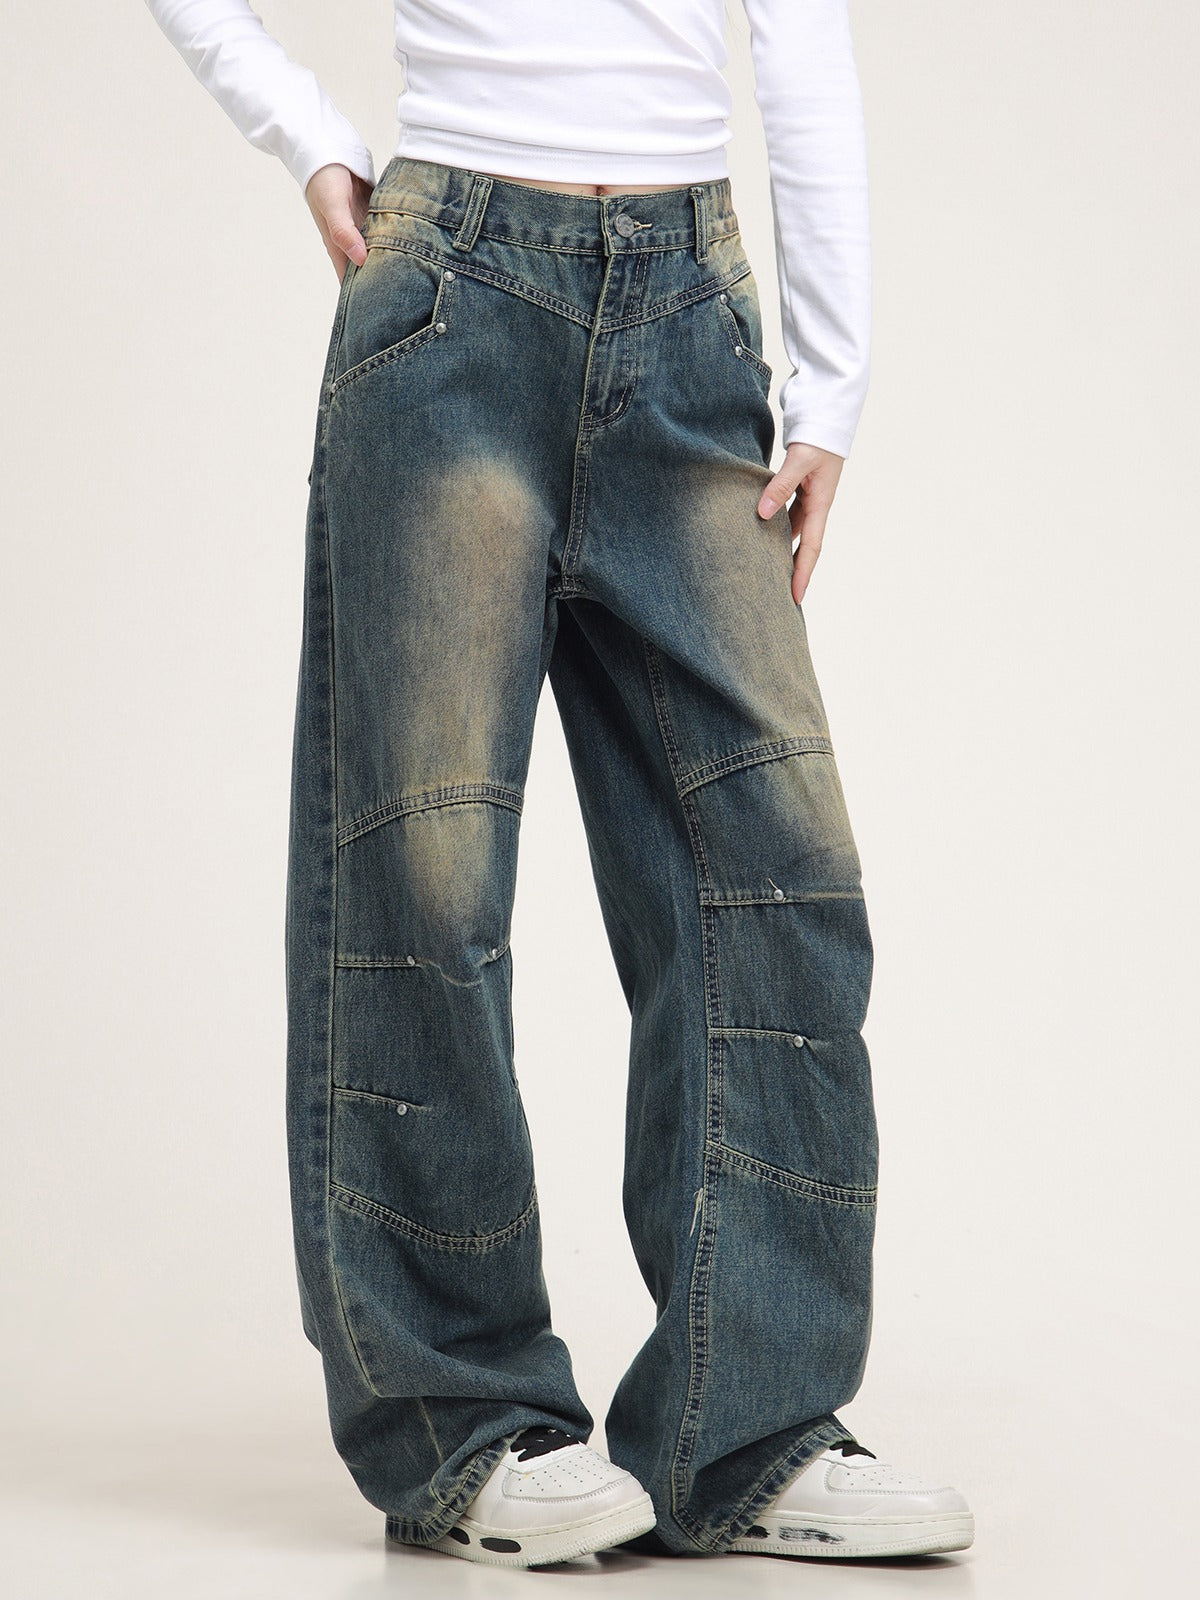 American studded washed jeans pants